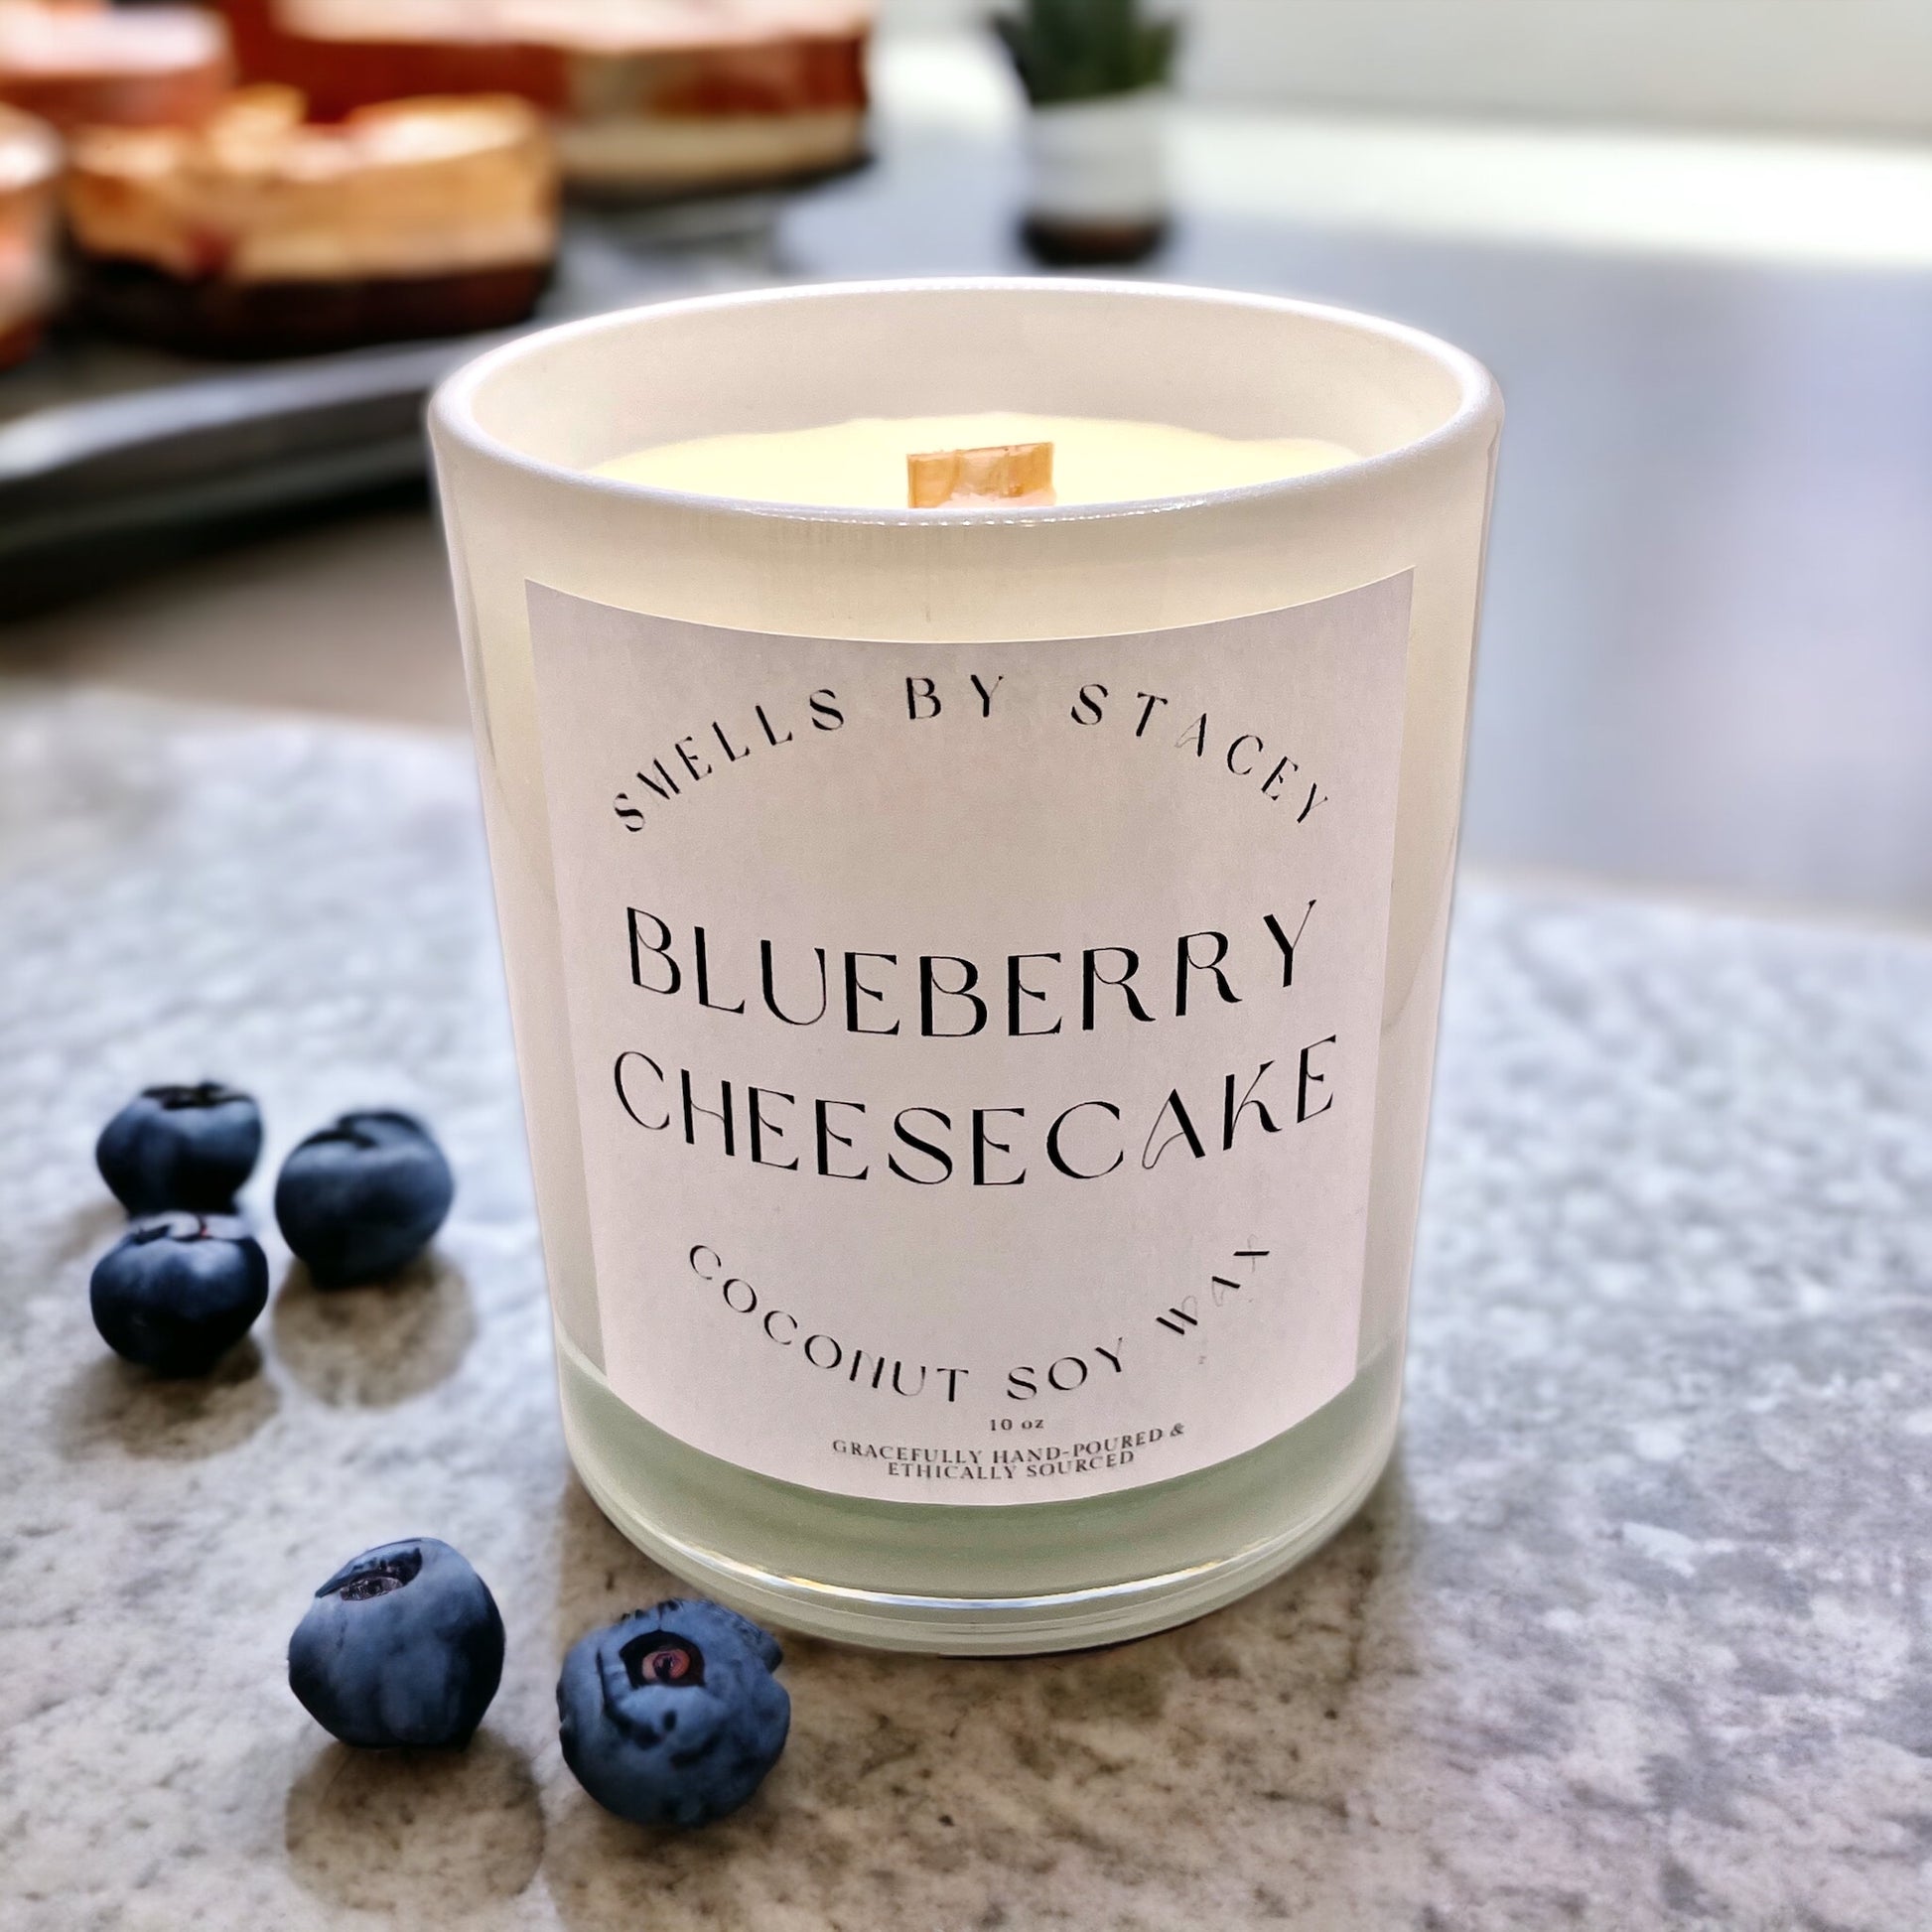 BAR HARBOR BLUEBERRY Baked Goods Scented Soy Candle Blueberry Lovers' Candle  Non-toxic Clean Burn Robust Scent Long Burn Time 